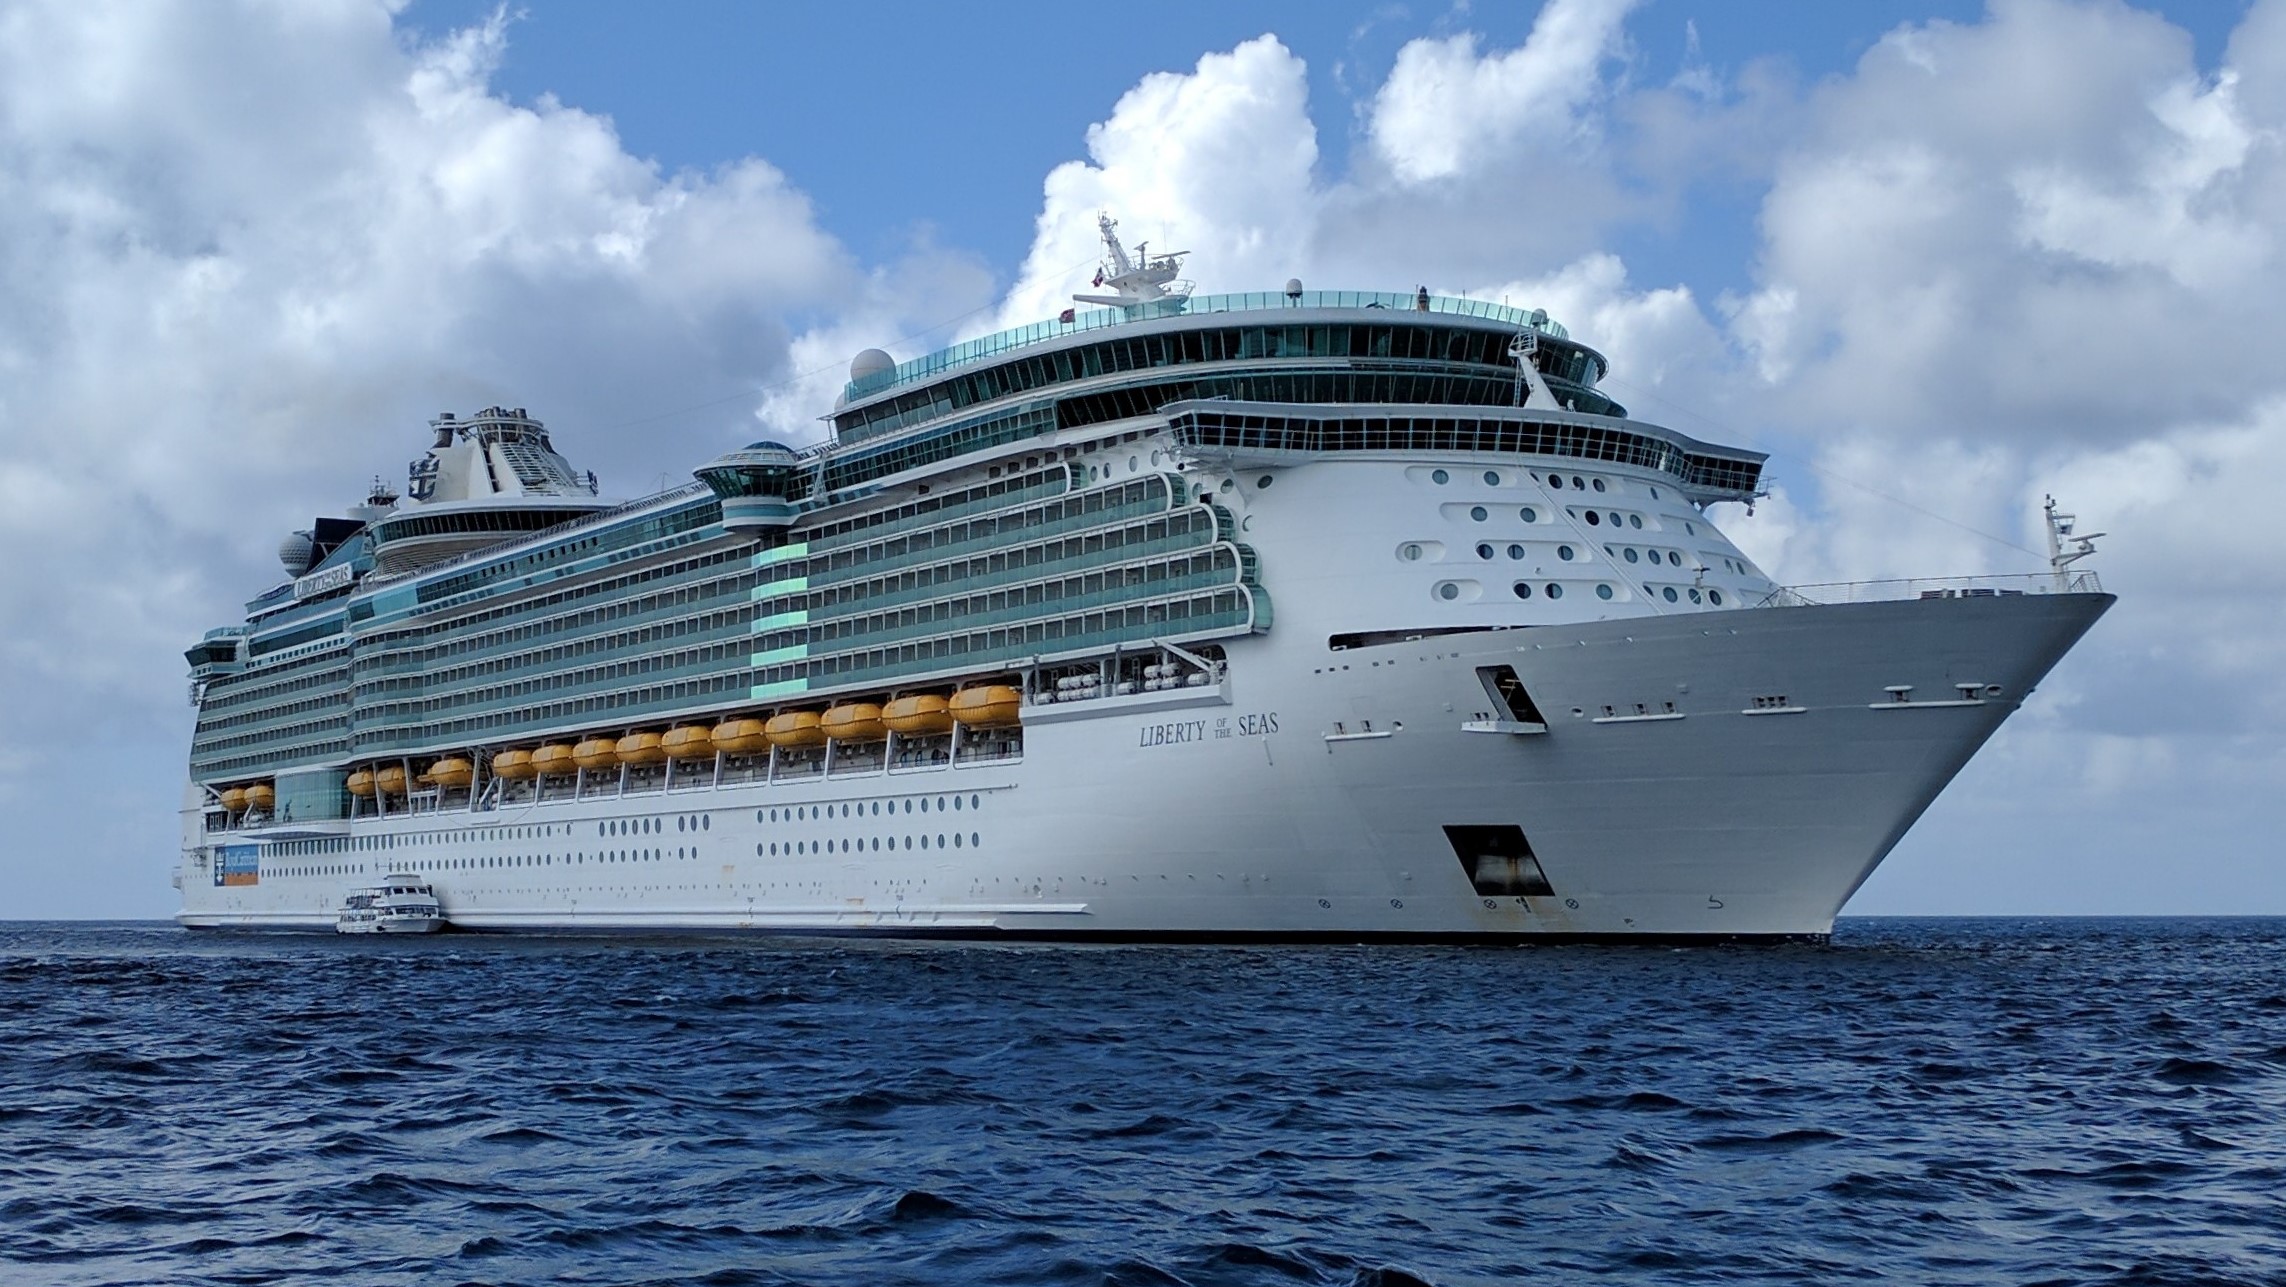 File:Liberty Of The Seas GC 12-22-16 (cropped).jpg - Wikimedia Commons